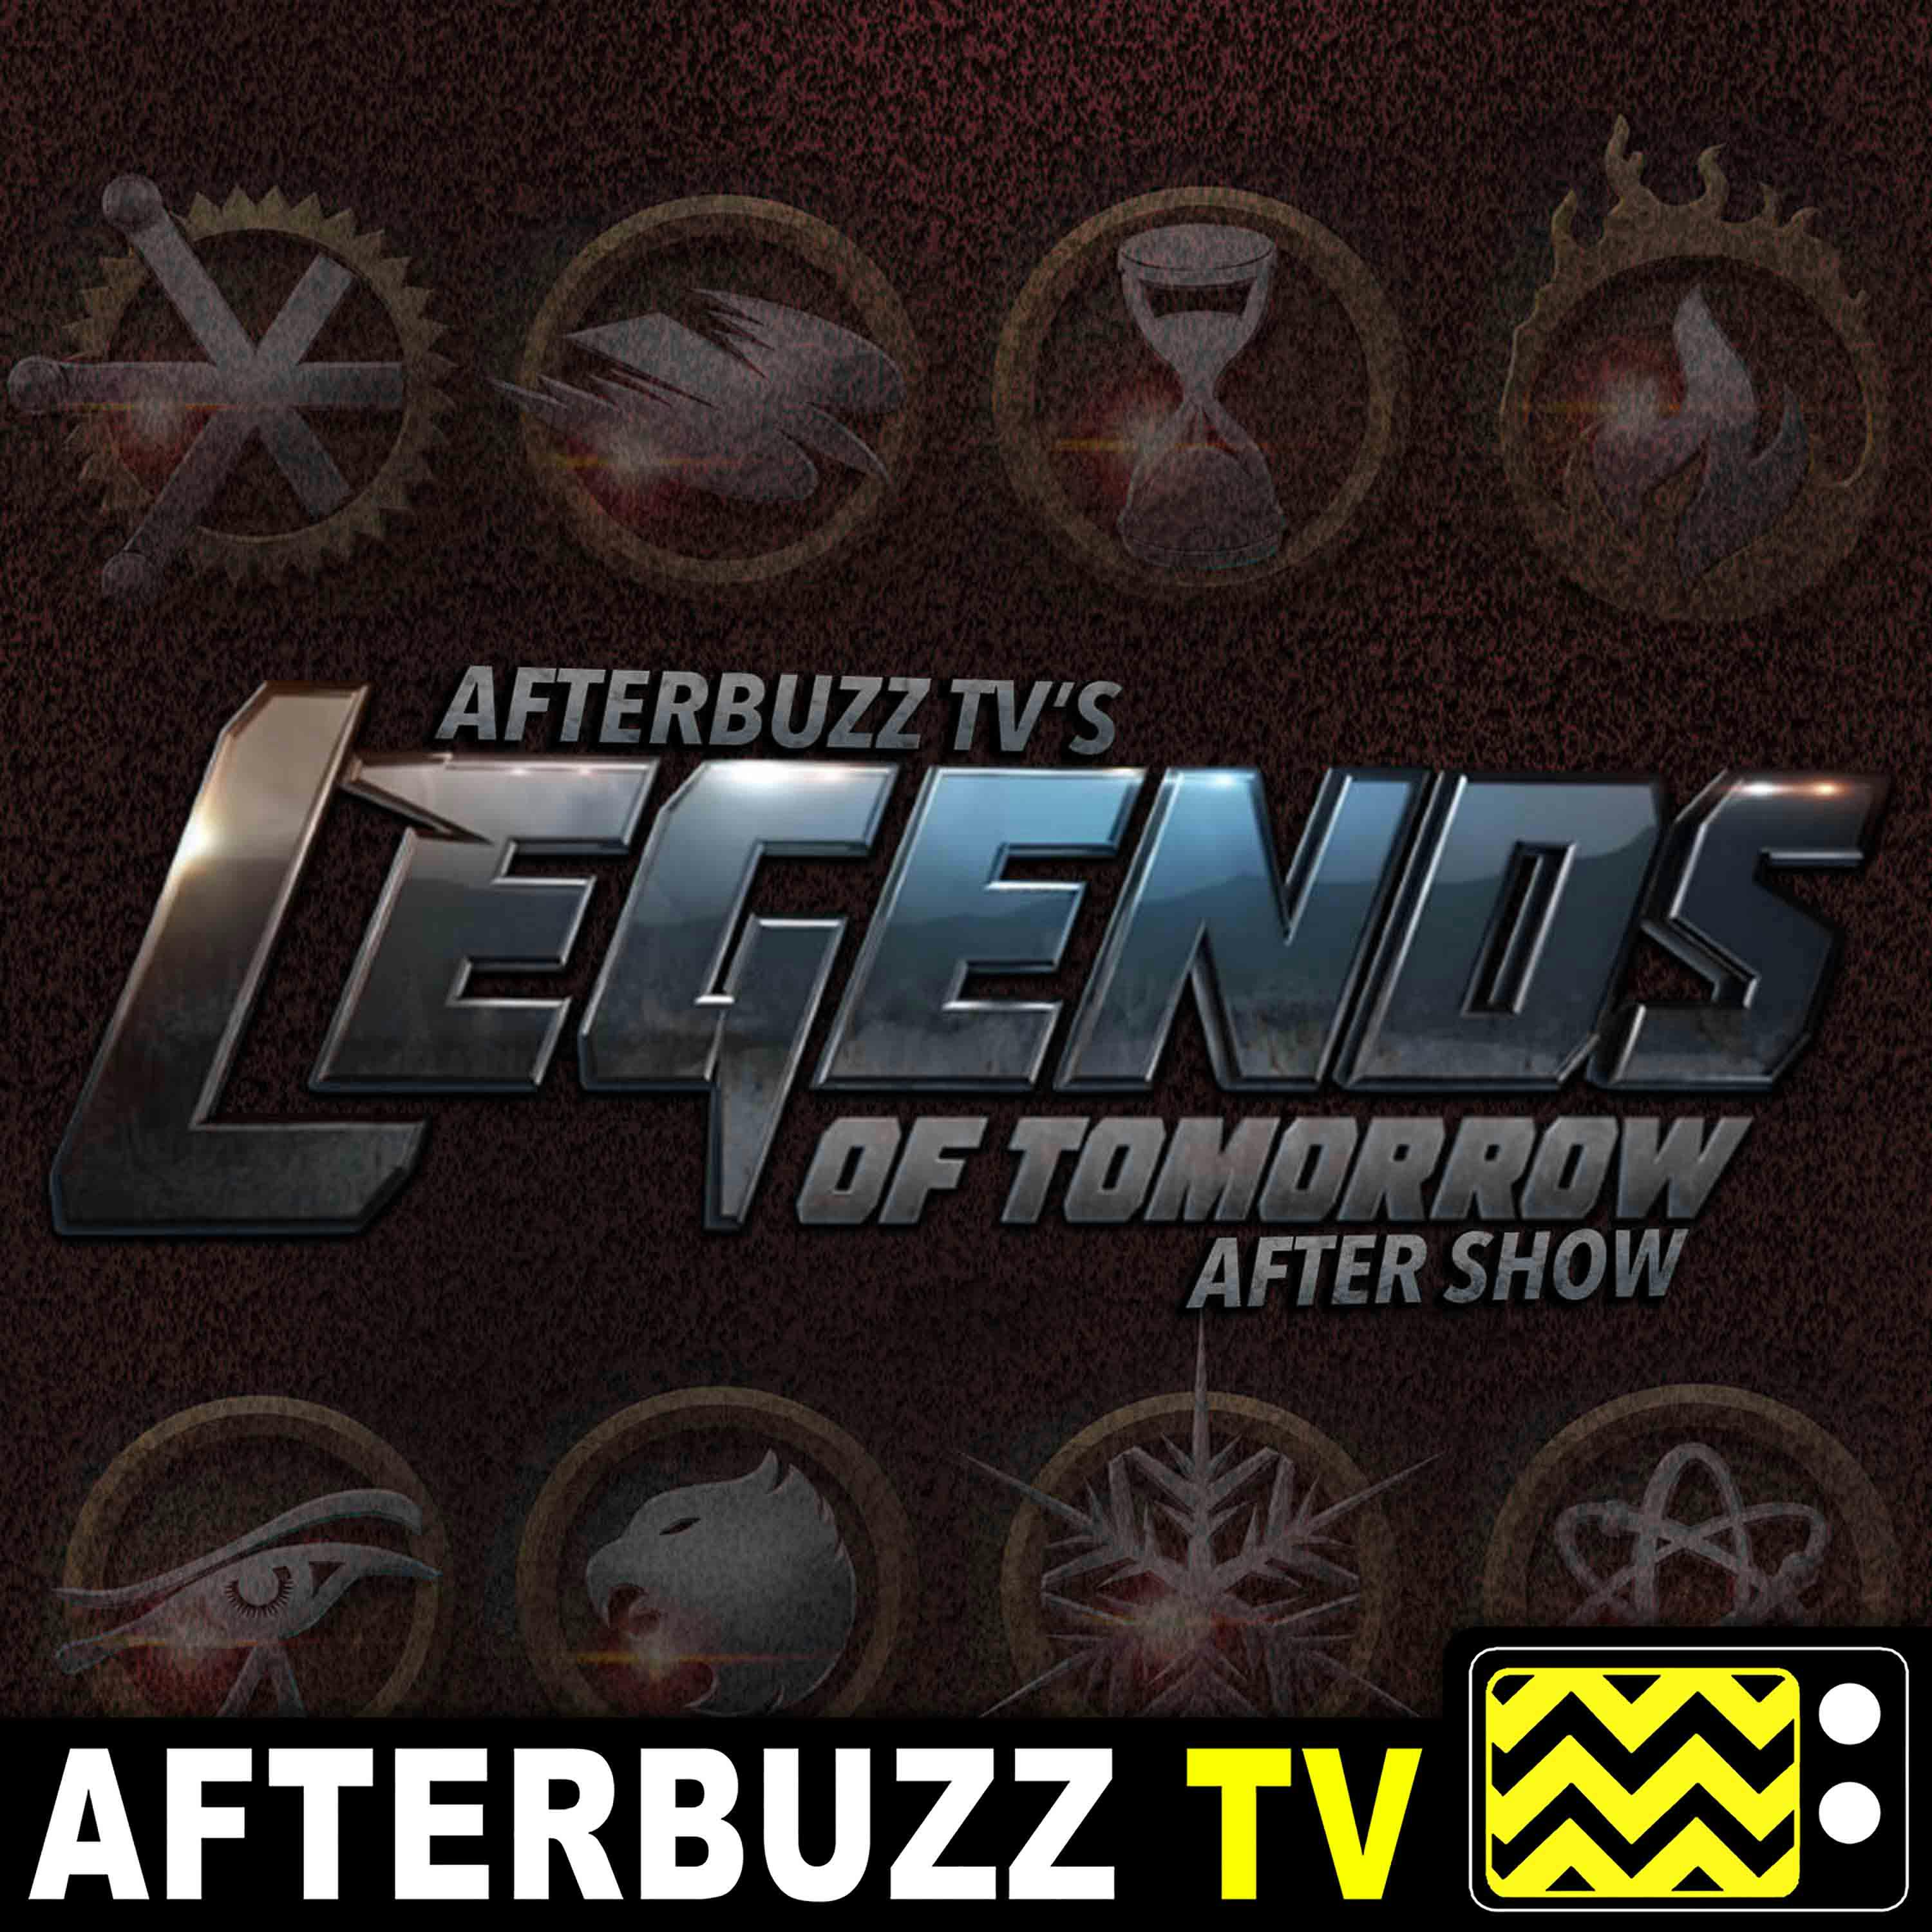 Legends Of Tomorrow S5 E15 Recap & After Show: A Date with the Fates